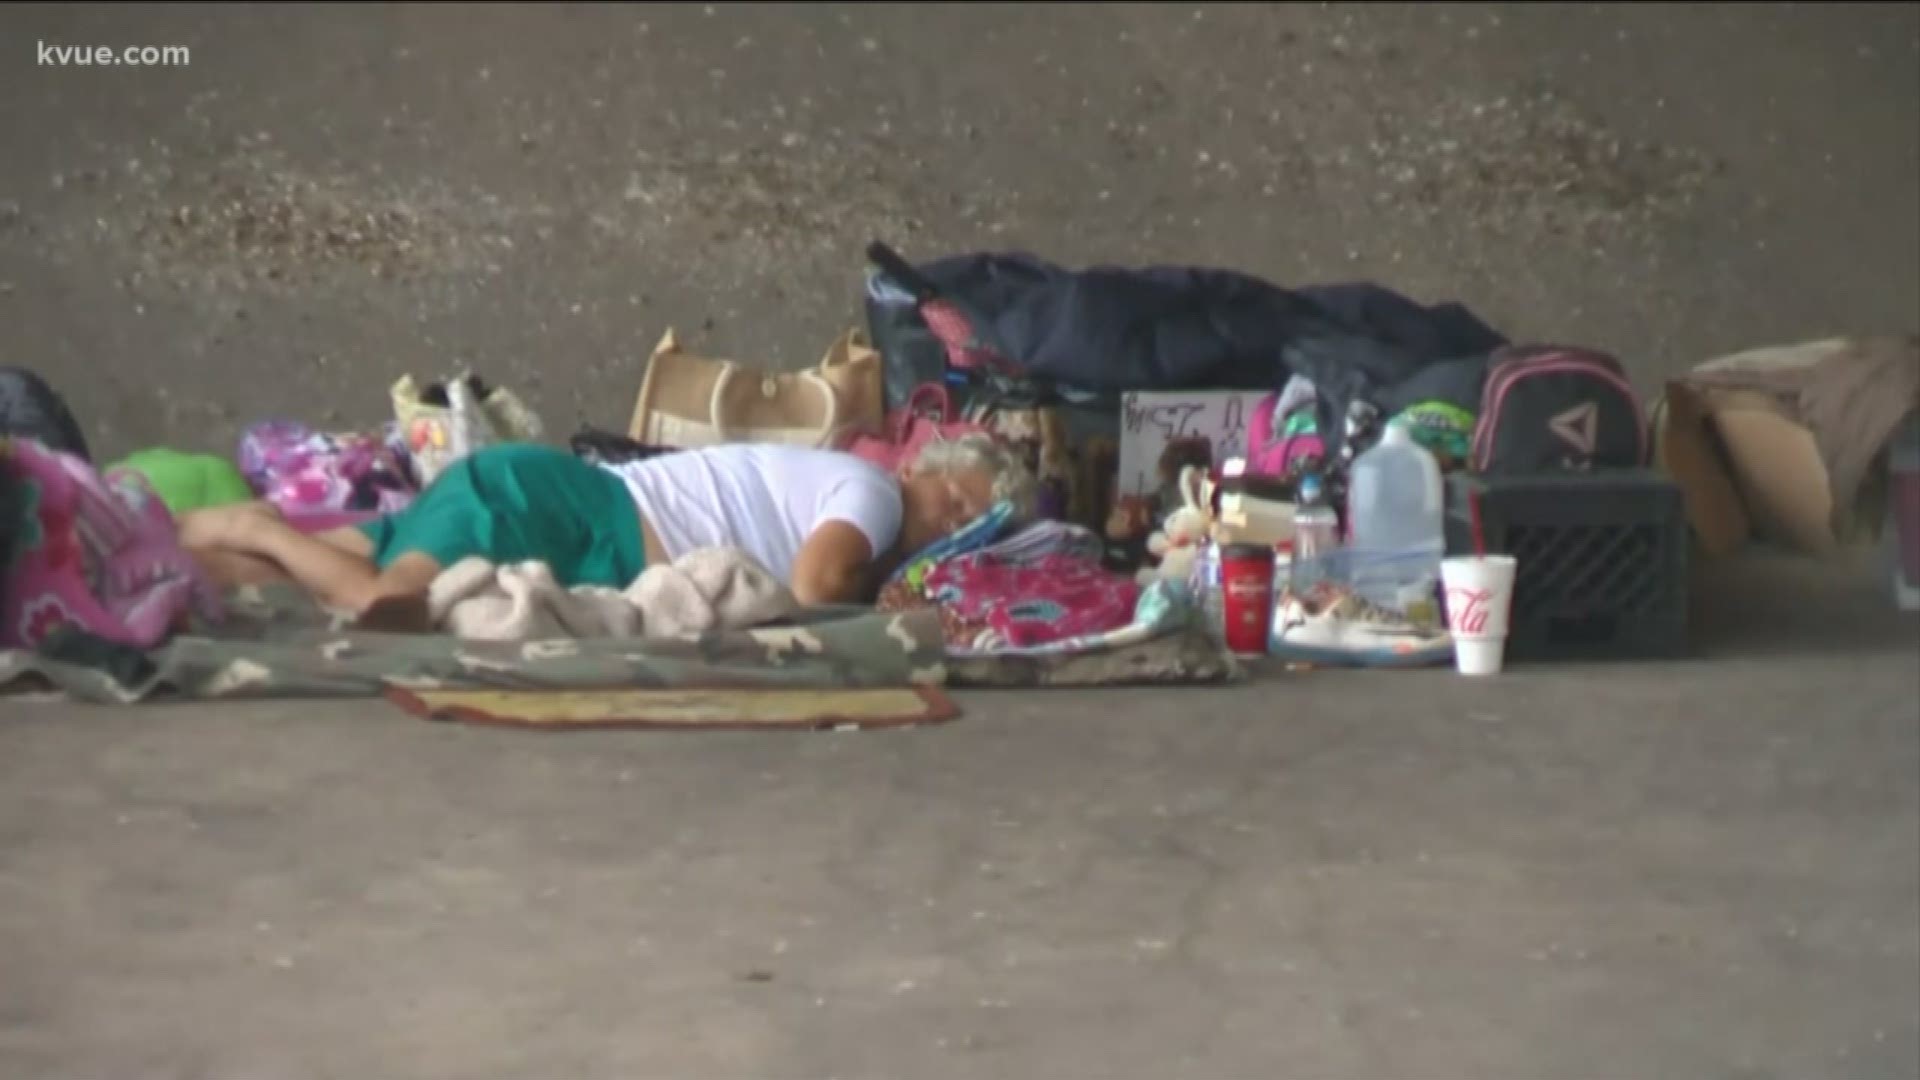 It is now legal for the homeless to camp in public spaces in Austin.